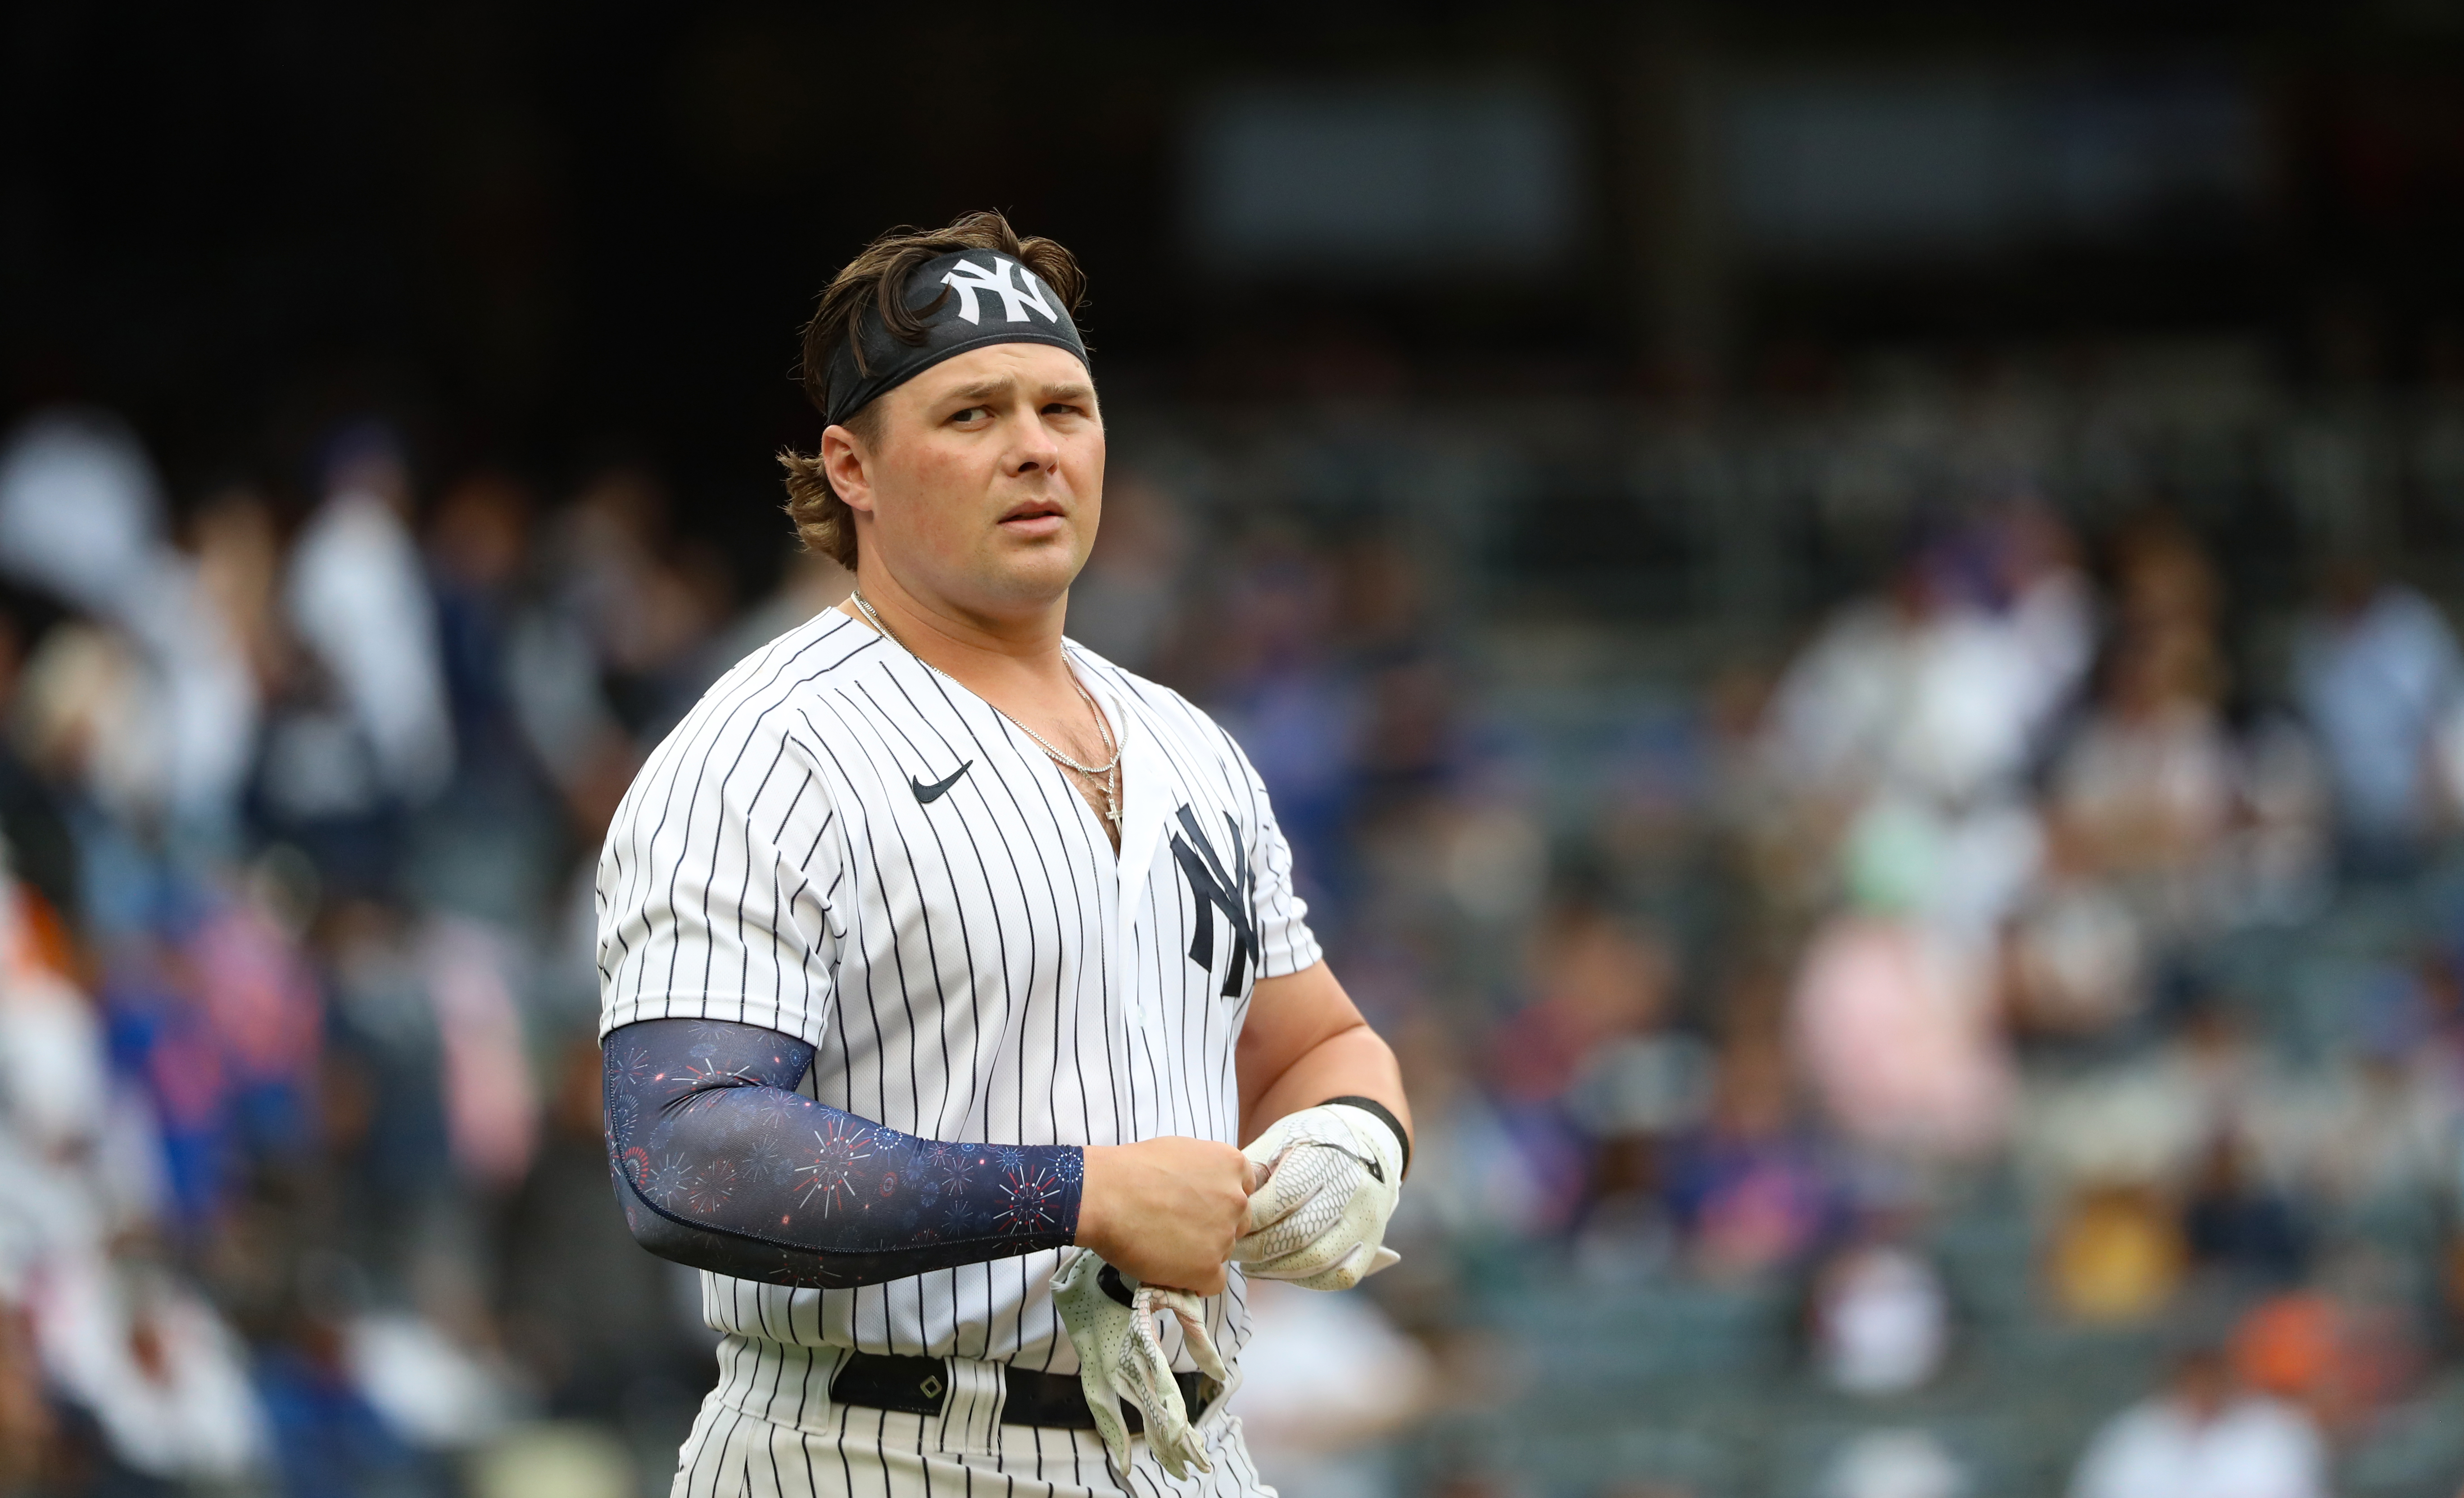 MLB rumors: Yankees pushing Luke Voit, but without much interest